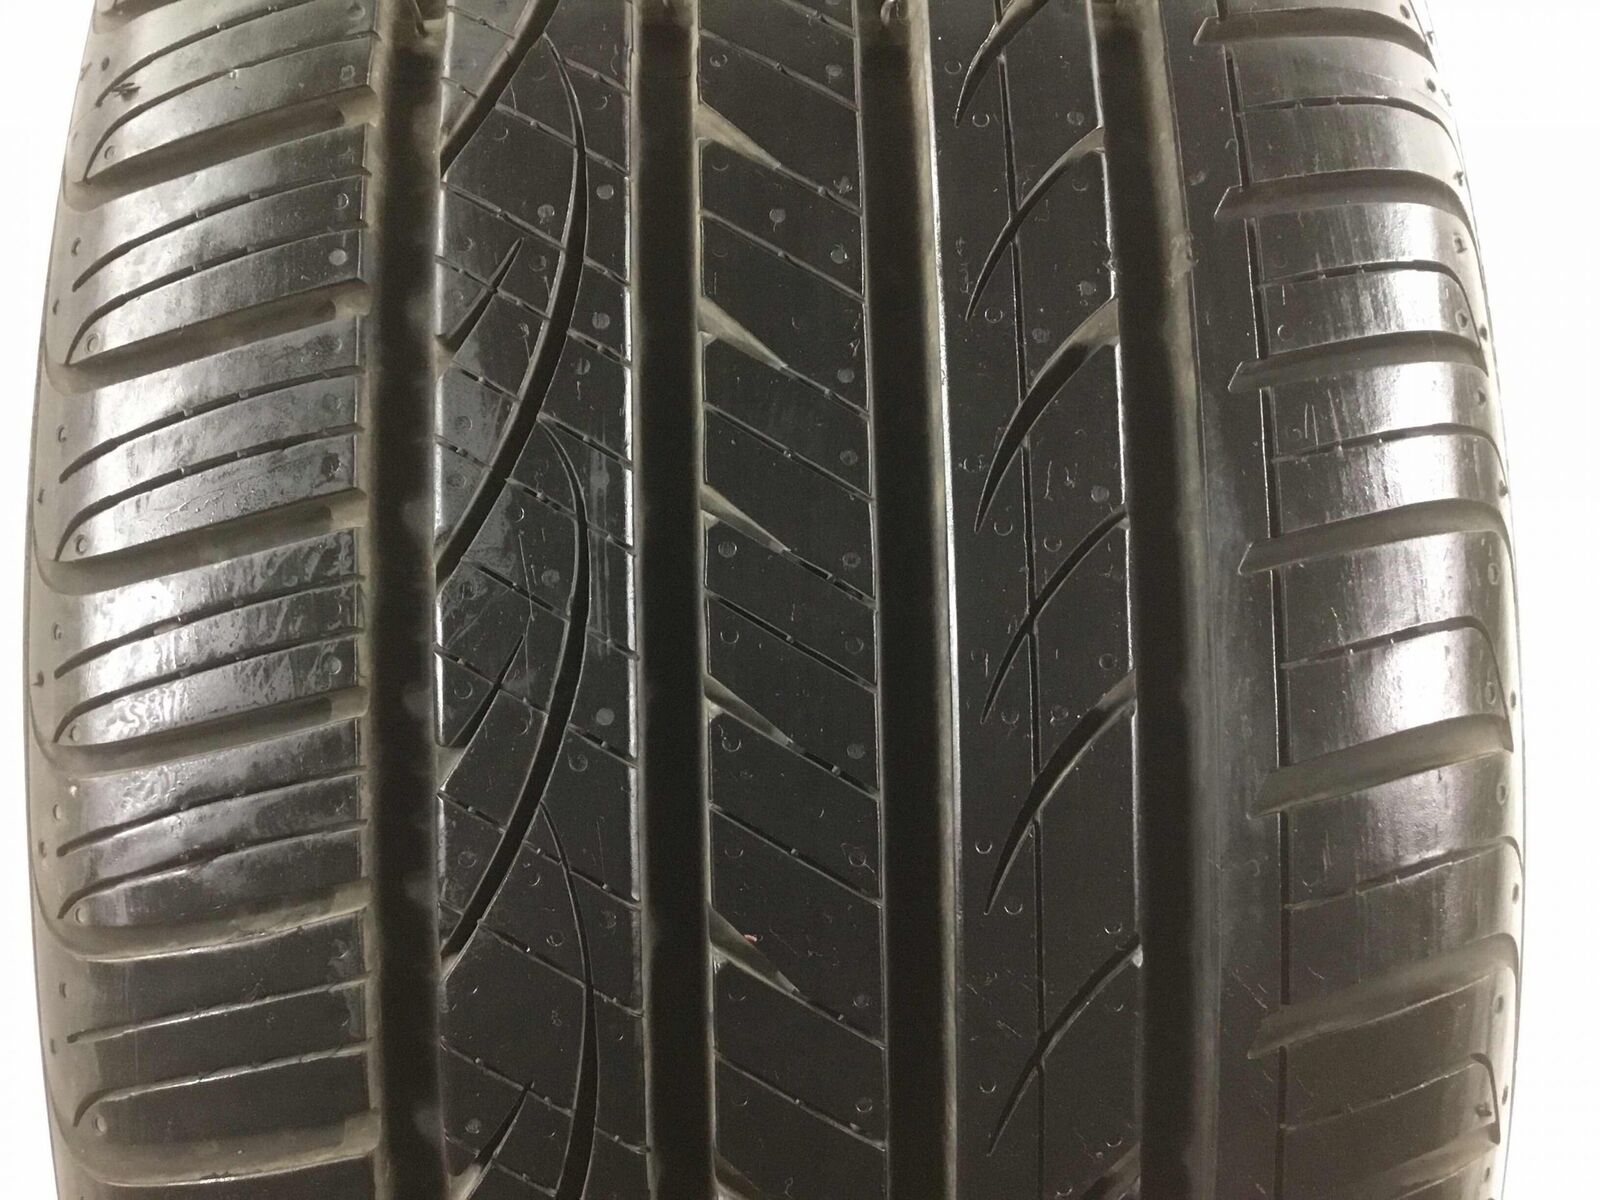 P225/40R18 Hankook Ventus S1 Noble2 92 H Used 8/32nds